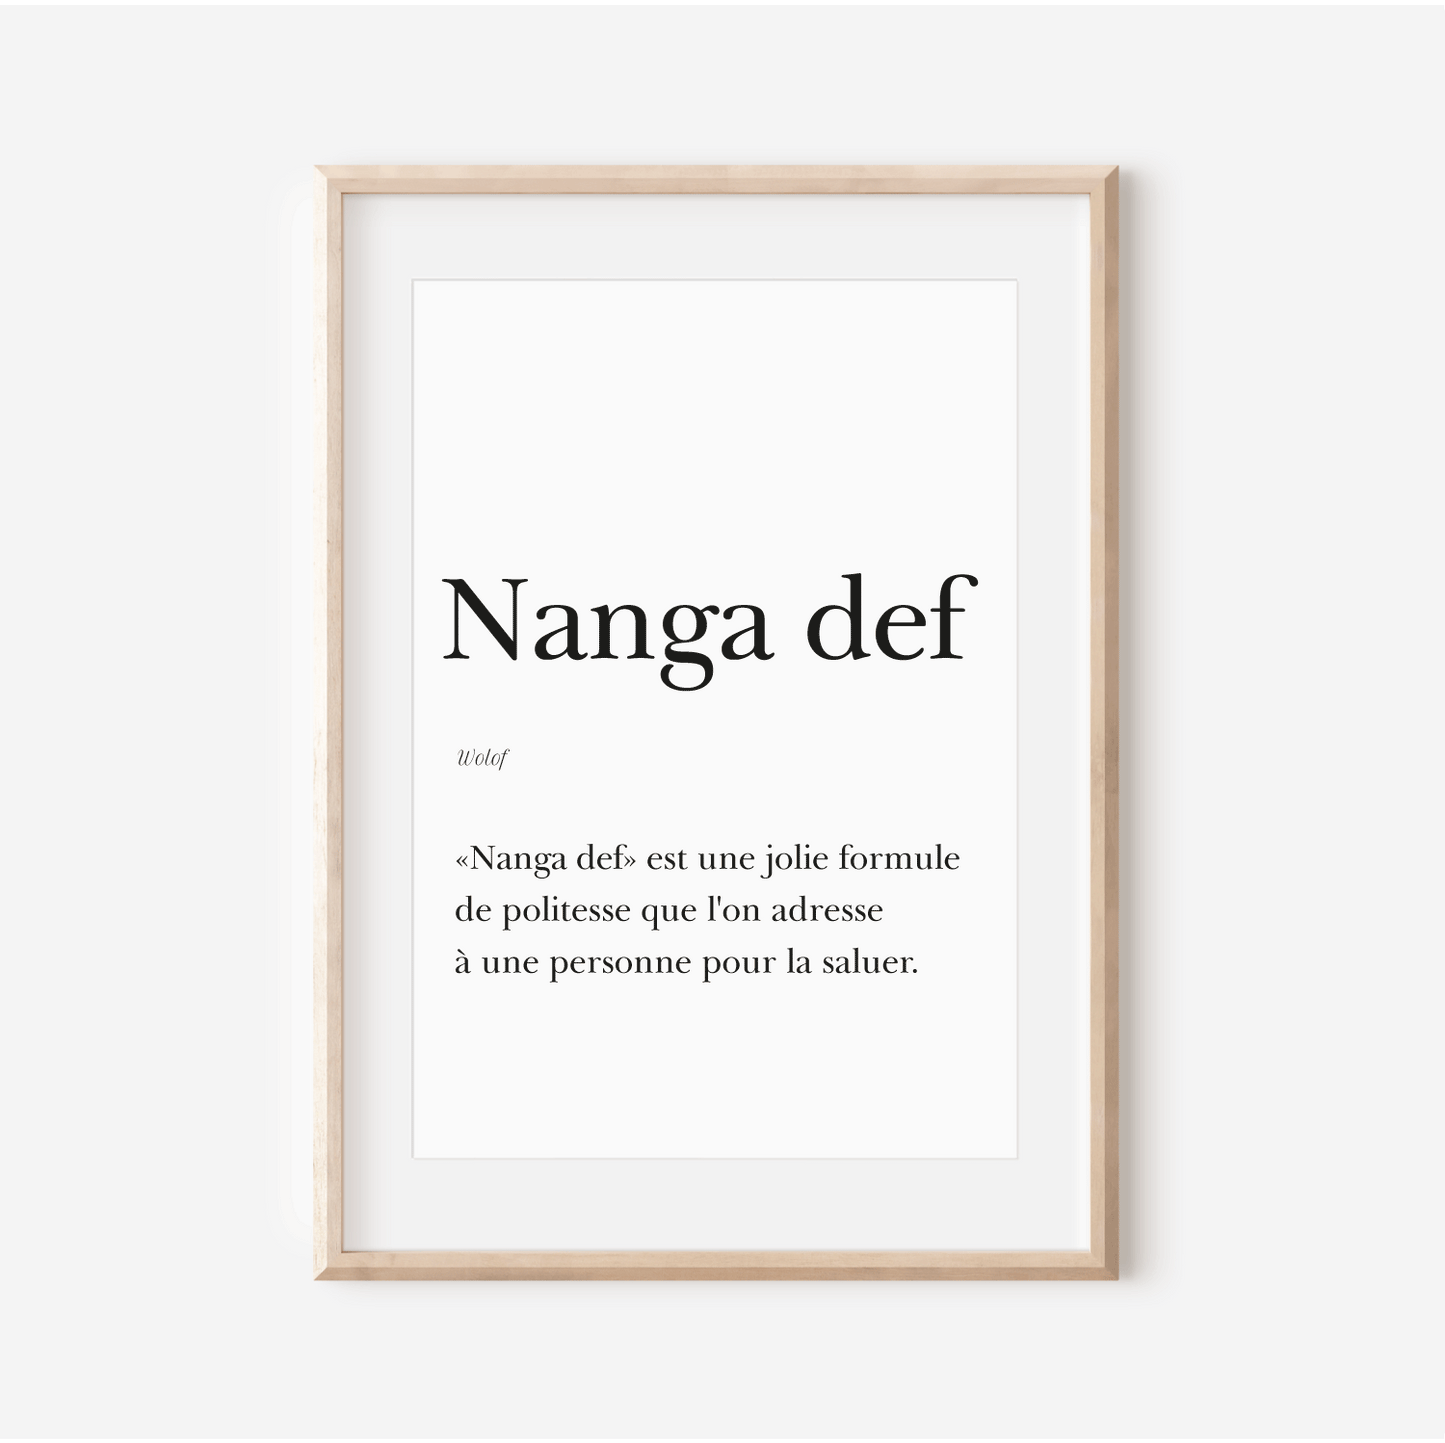 "Nanga def" poster - "How are you?" in Wolof